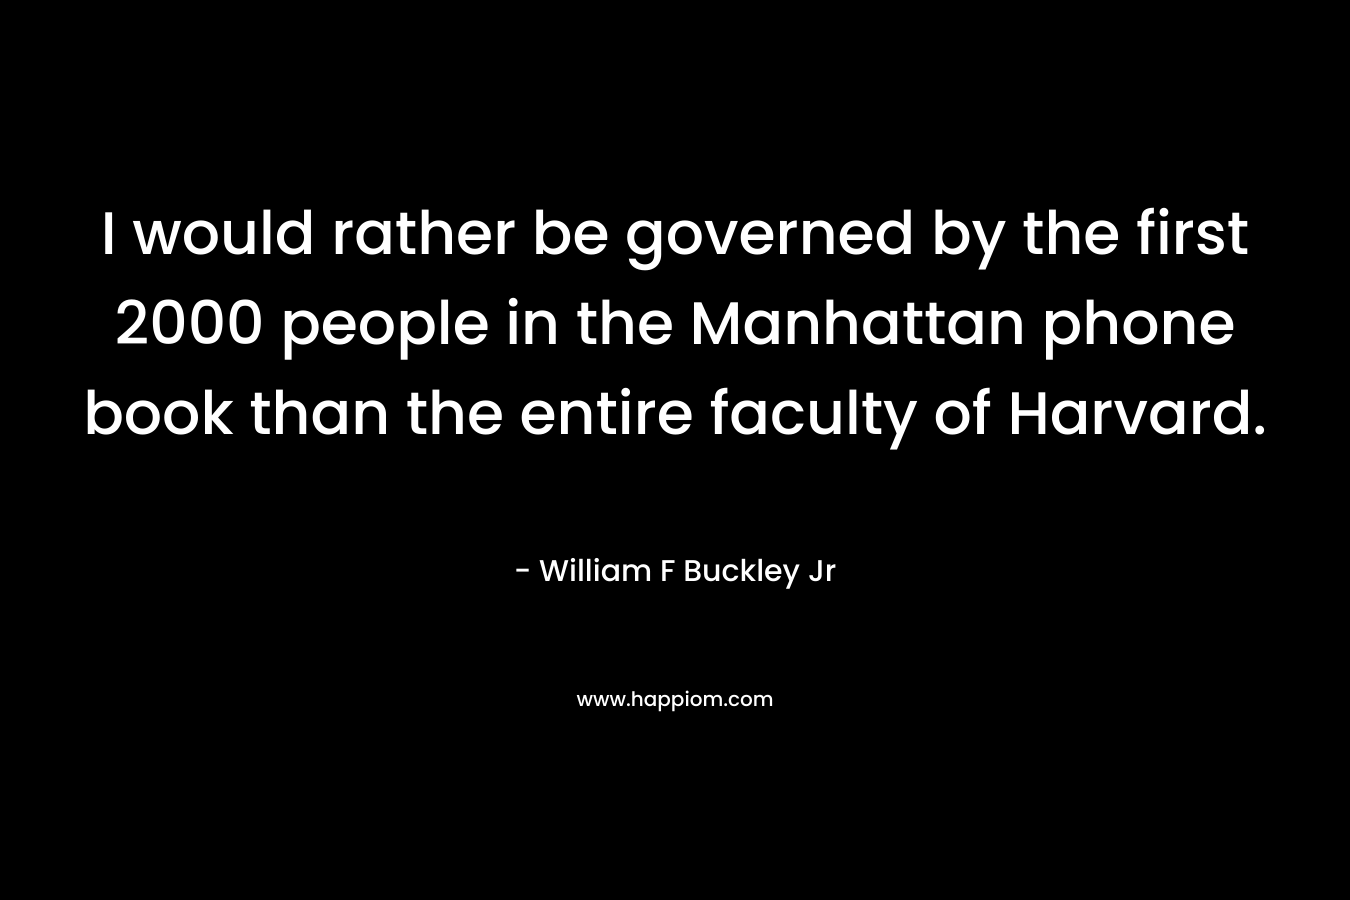 I would rather be governed by the first 2000 people in the Manhattan phone book than the entire faculty of Harvard. – William F Buckley Jr